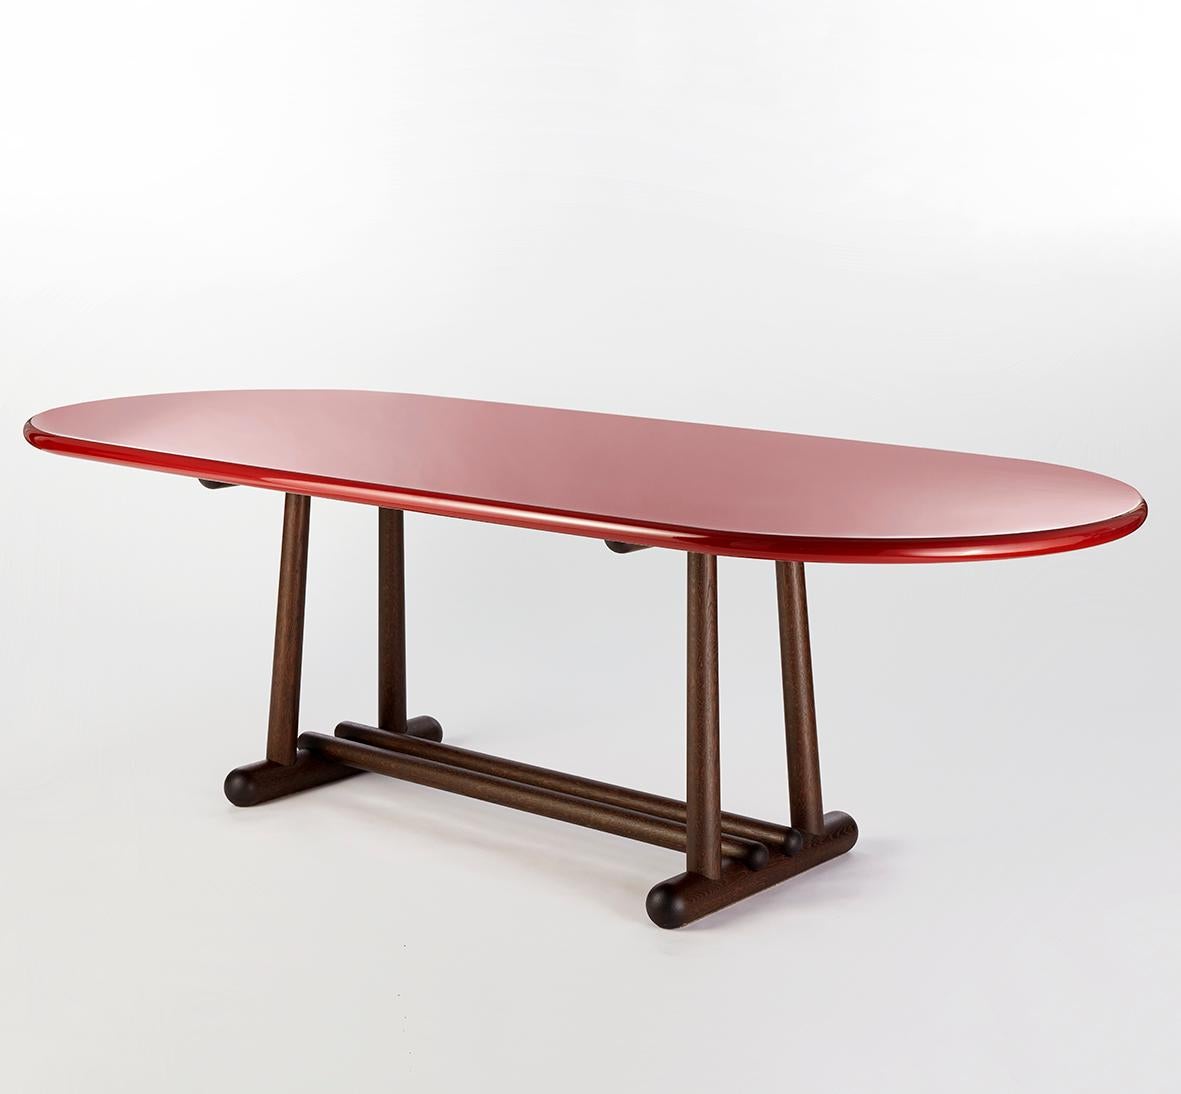 Belenus dining table by Gisbert Pöppler
Dimensions: D 240 x W 101 x H 73 cm
Materials: High gloss lacquered wood, smoked oak
La Luna extension side table also available.

The Belenus table stands on solid rounded legs and connecting oval shaped